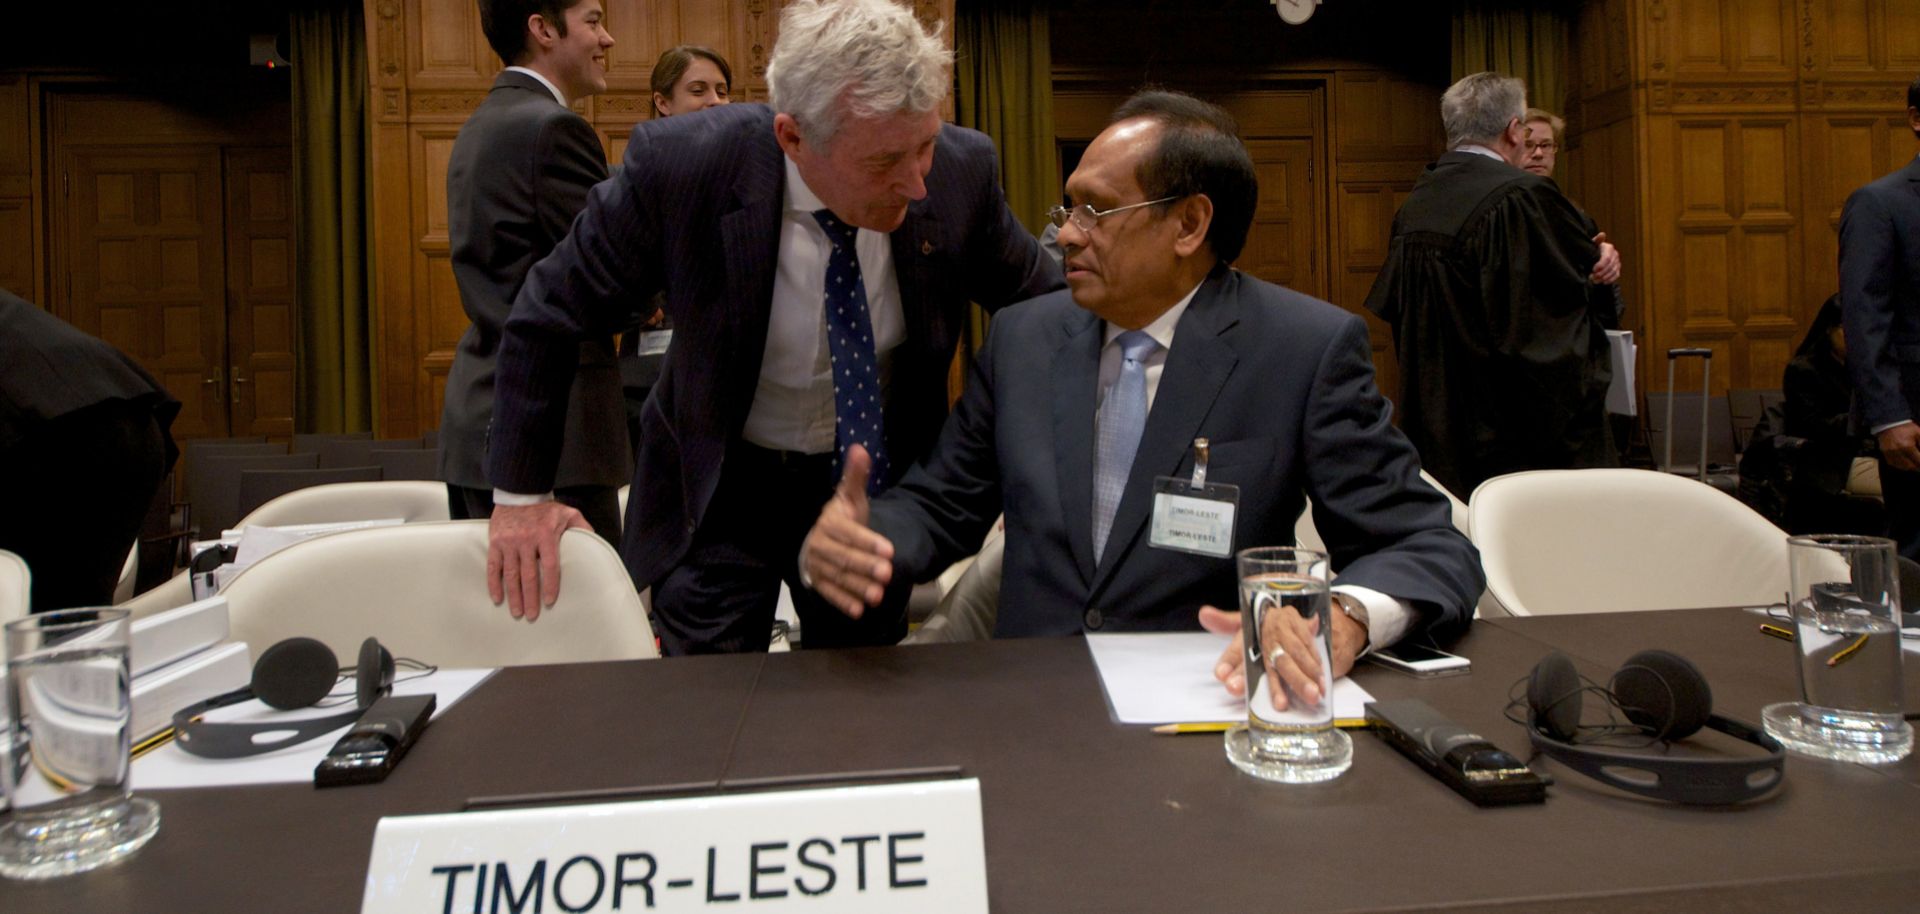 Timor-Leste's Foreign Affairs minister Jose Luis Gutierrez (R) speaks with Australian lawyer Bernard Collaery (L) during a session of the International Court of Justice in 2014. Collaery faces prosecution in Australia for disclosing information about the country's intelligence services in a case worthy of a spy novel.